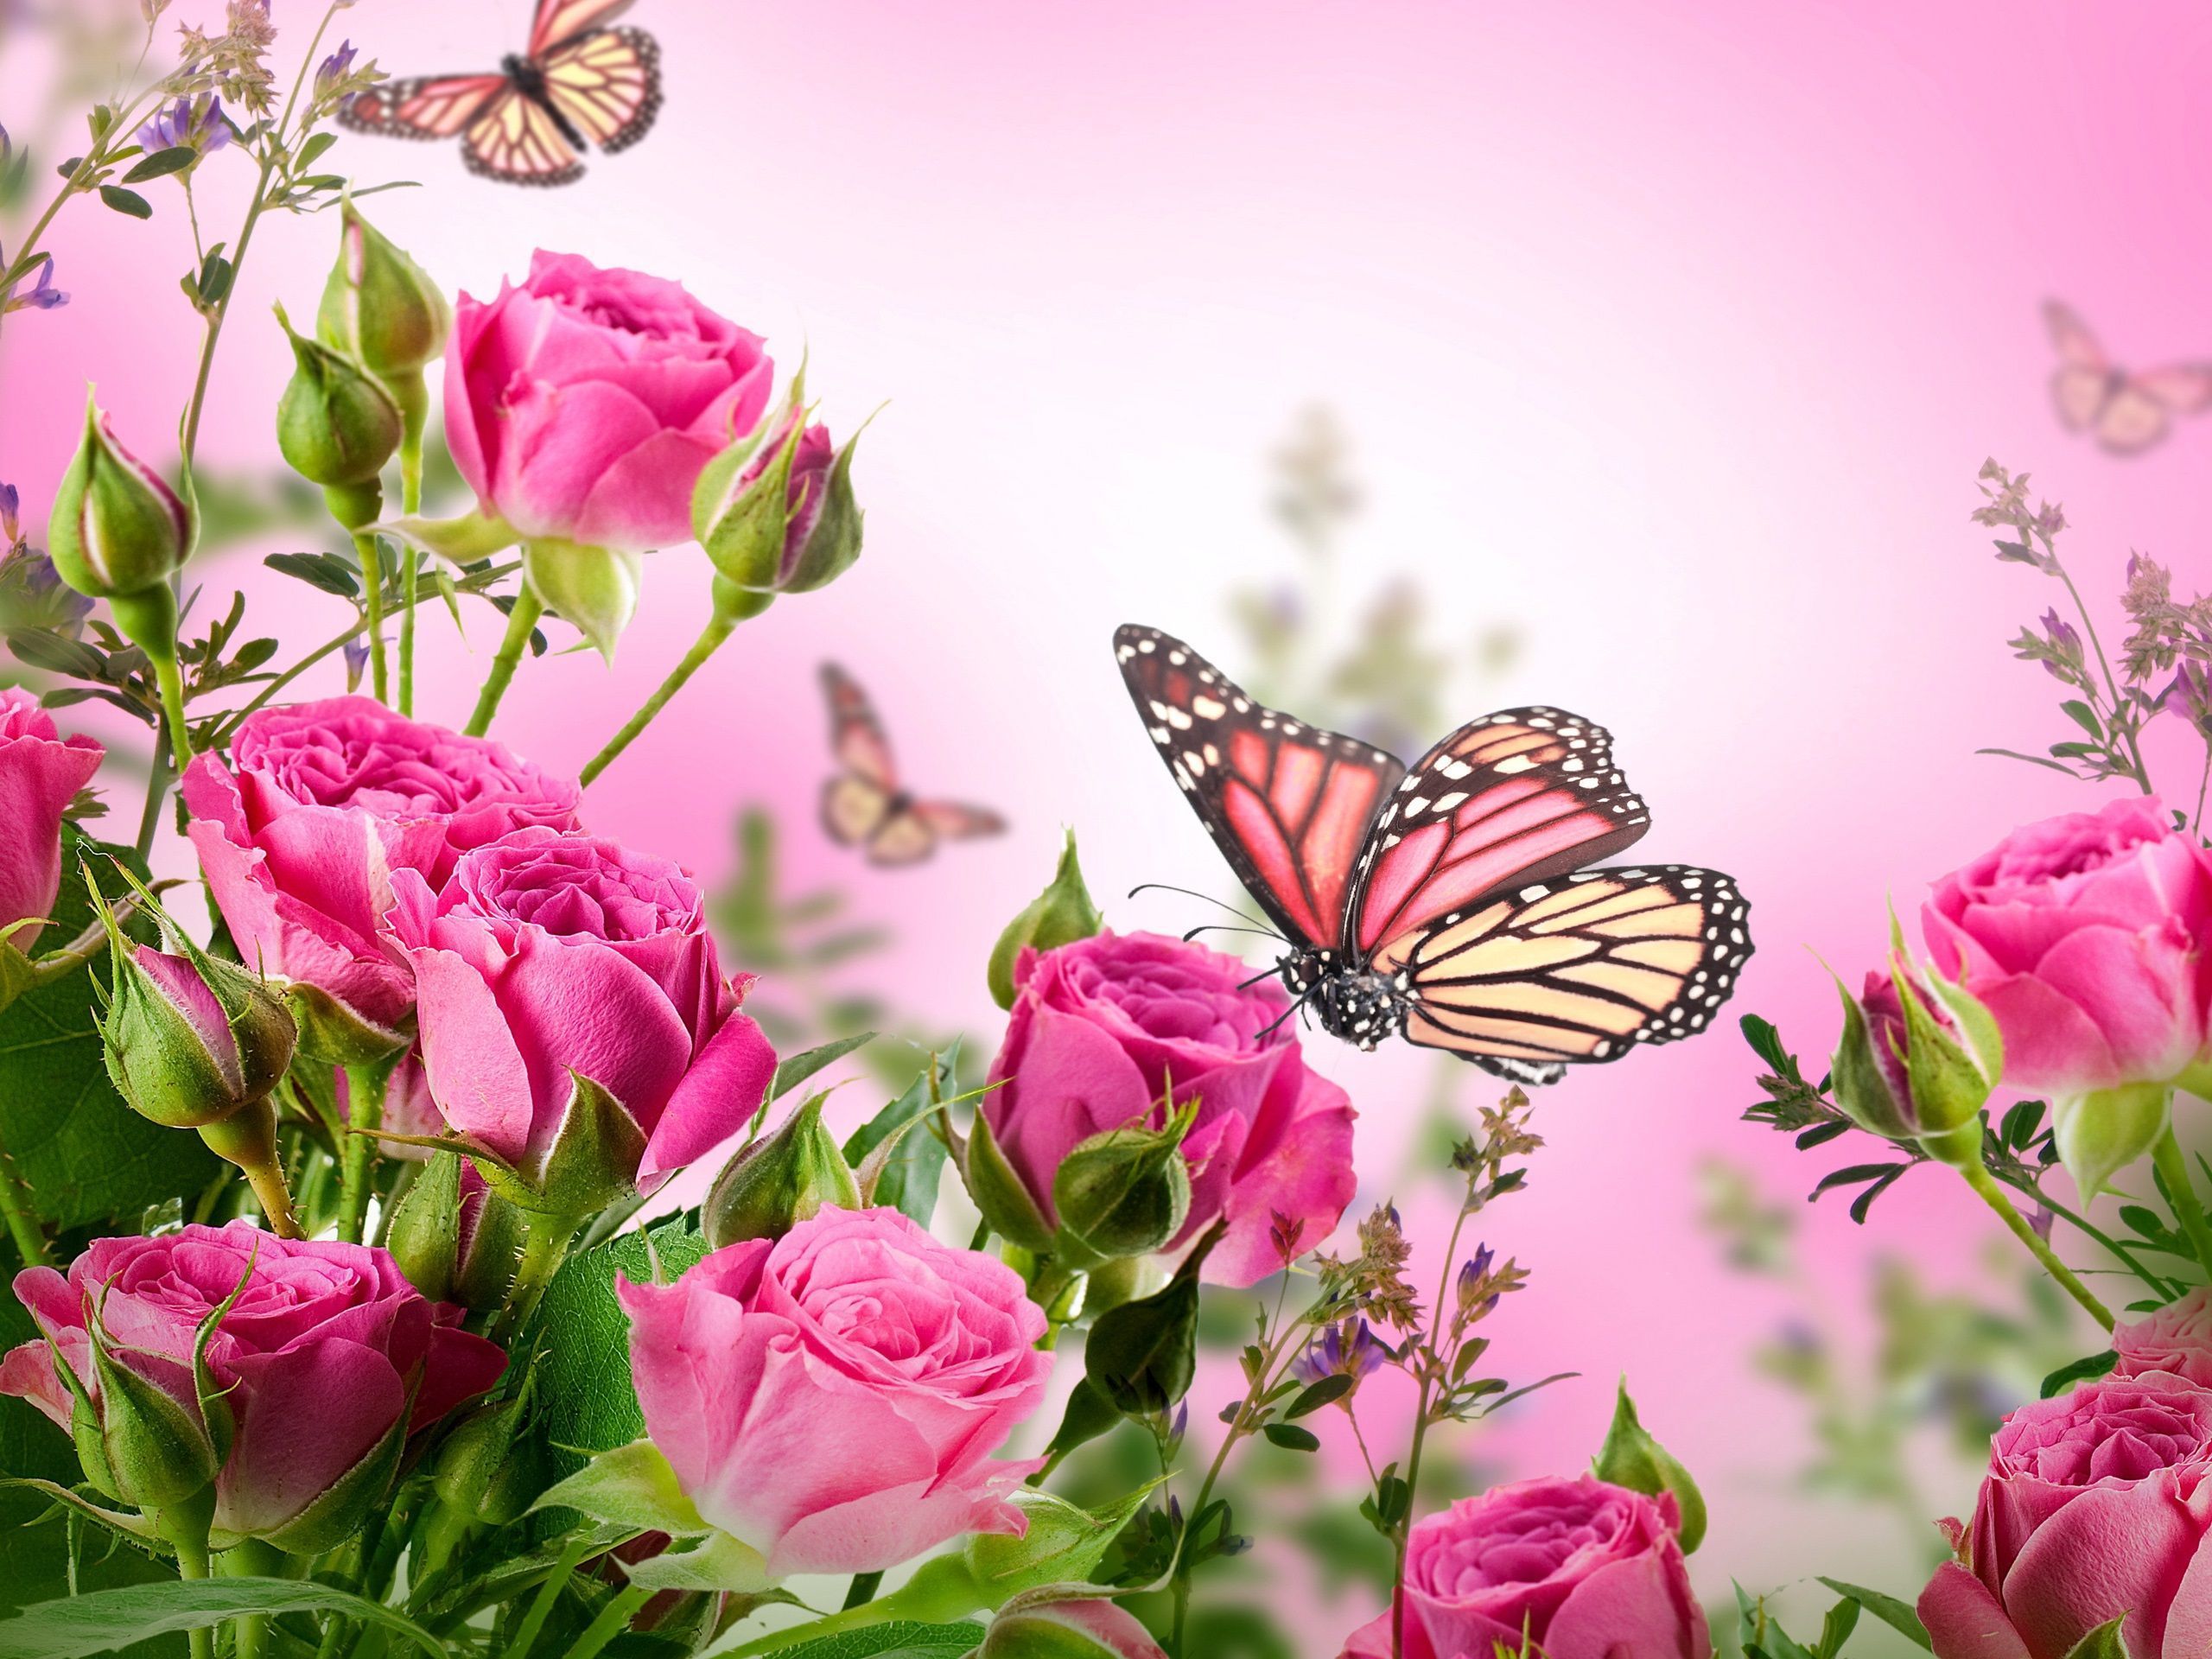 Pink Roses and Butterfly Wallpaper Free Pink Roses and Butterfly Background